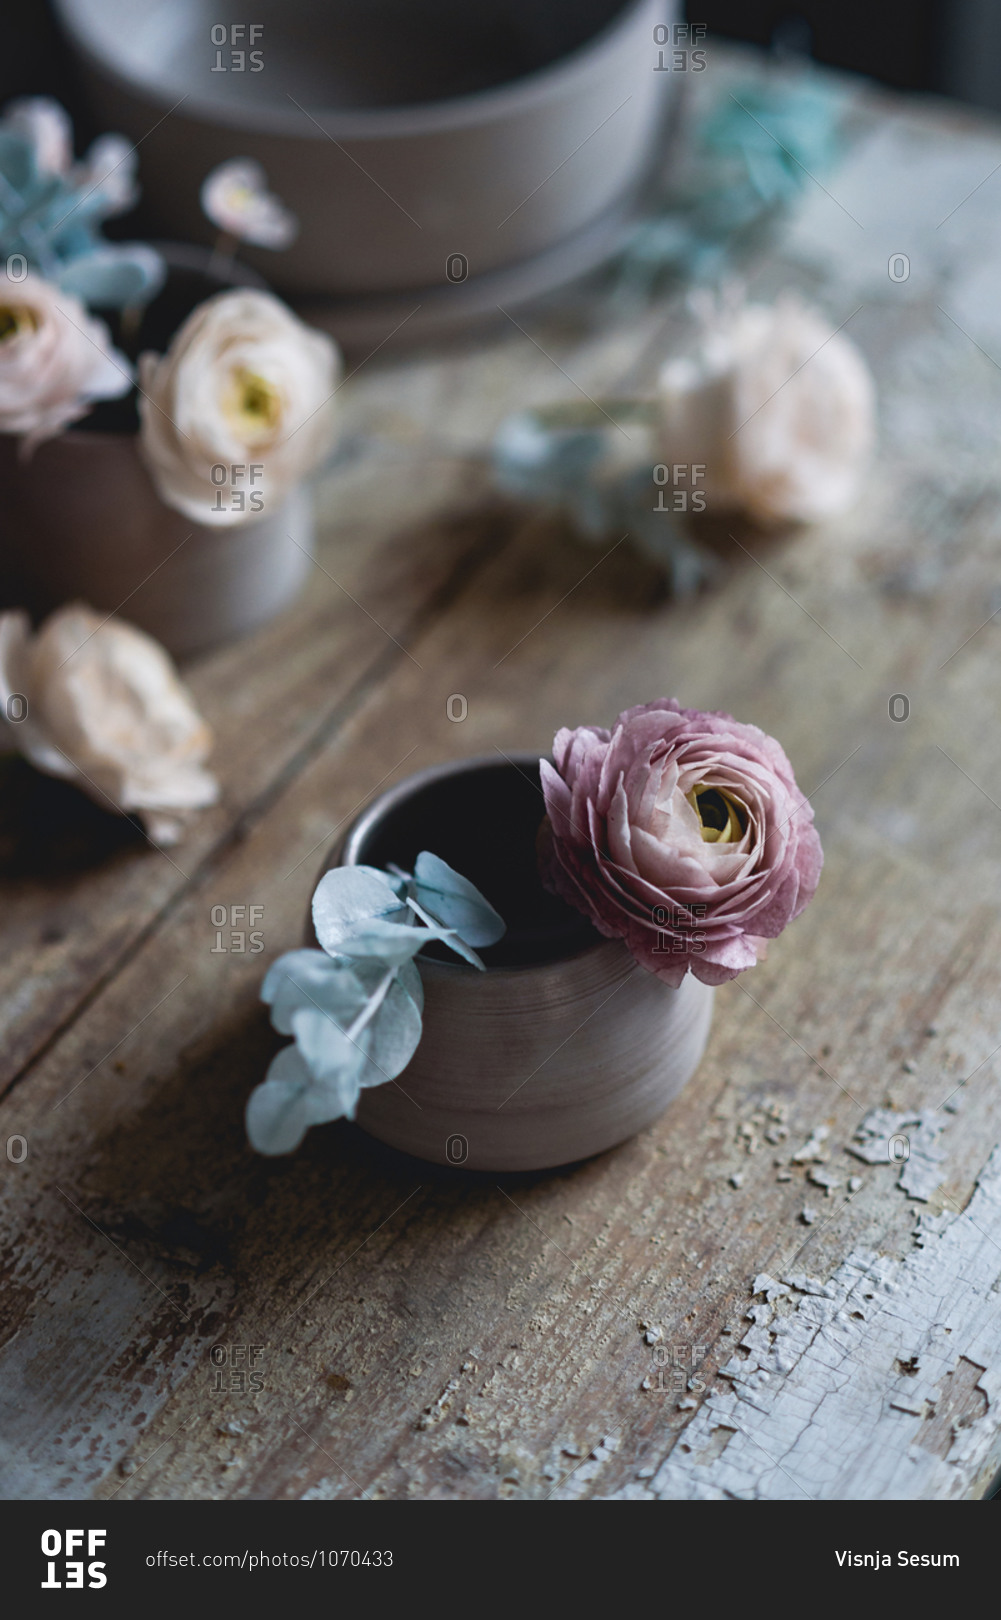 Overhead view of handmade ceramic cup with flowers inside